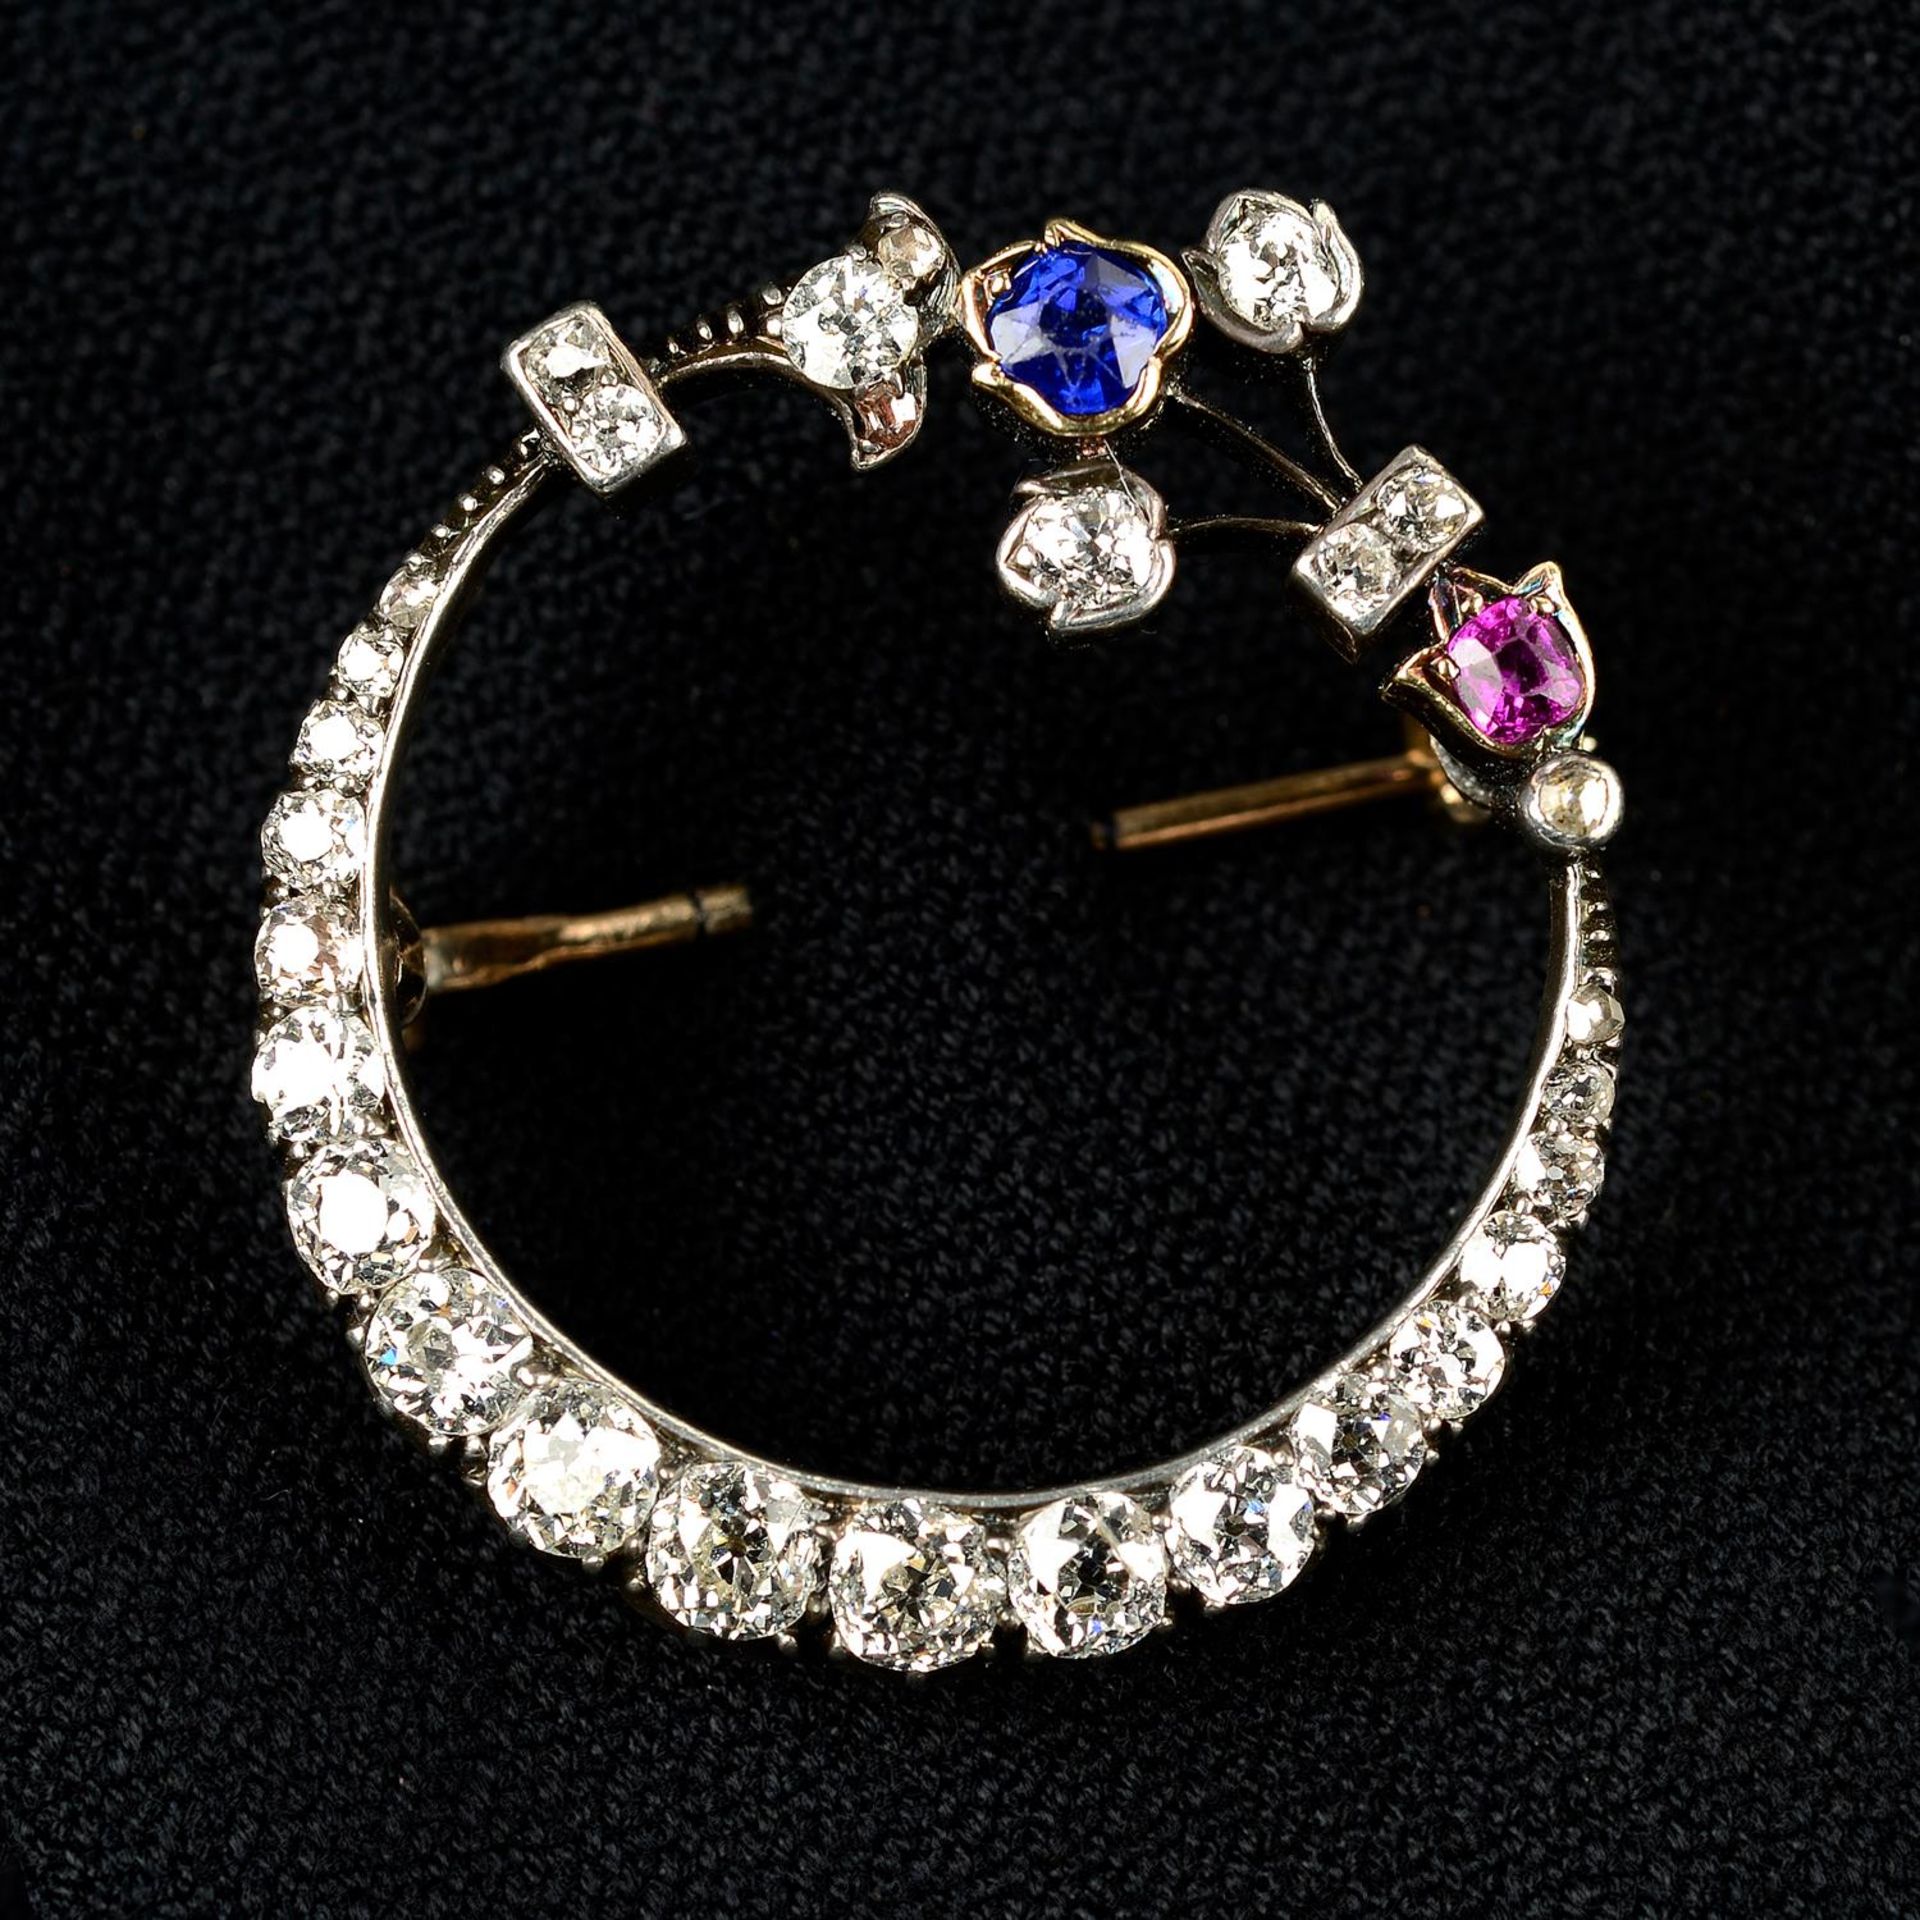 A late 19th century silver and gold, old-cut diamond, sapphire and ruby crescent brooch.